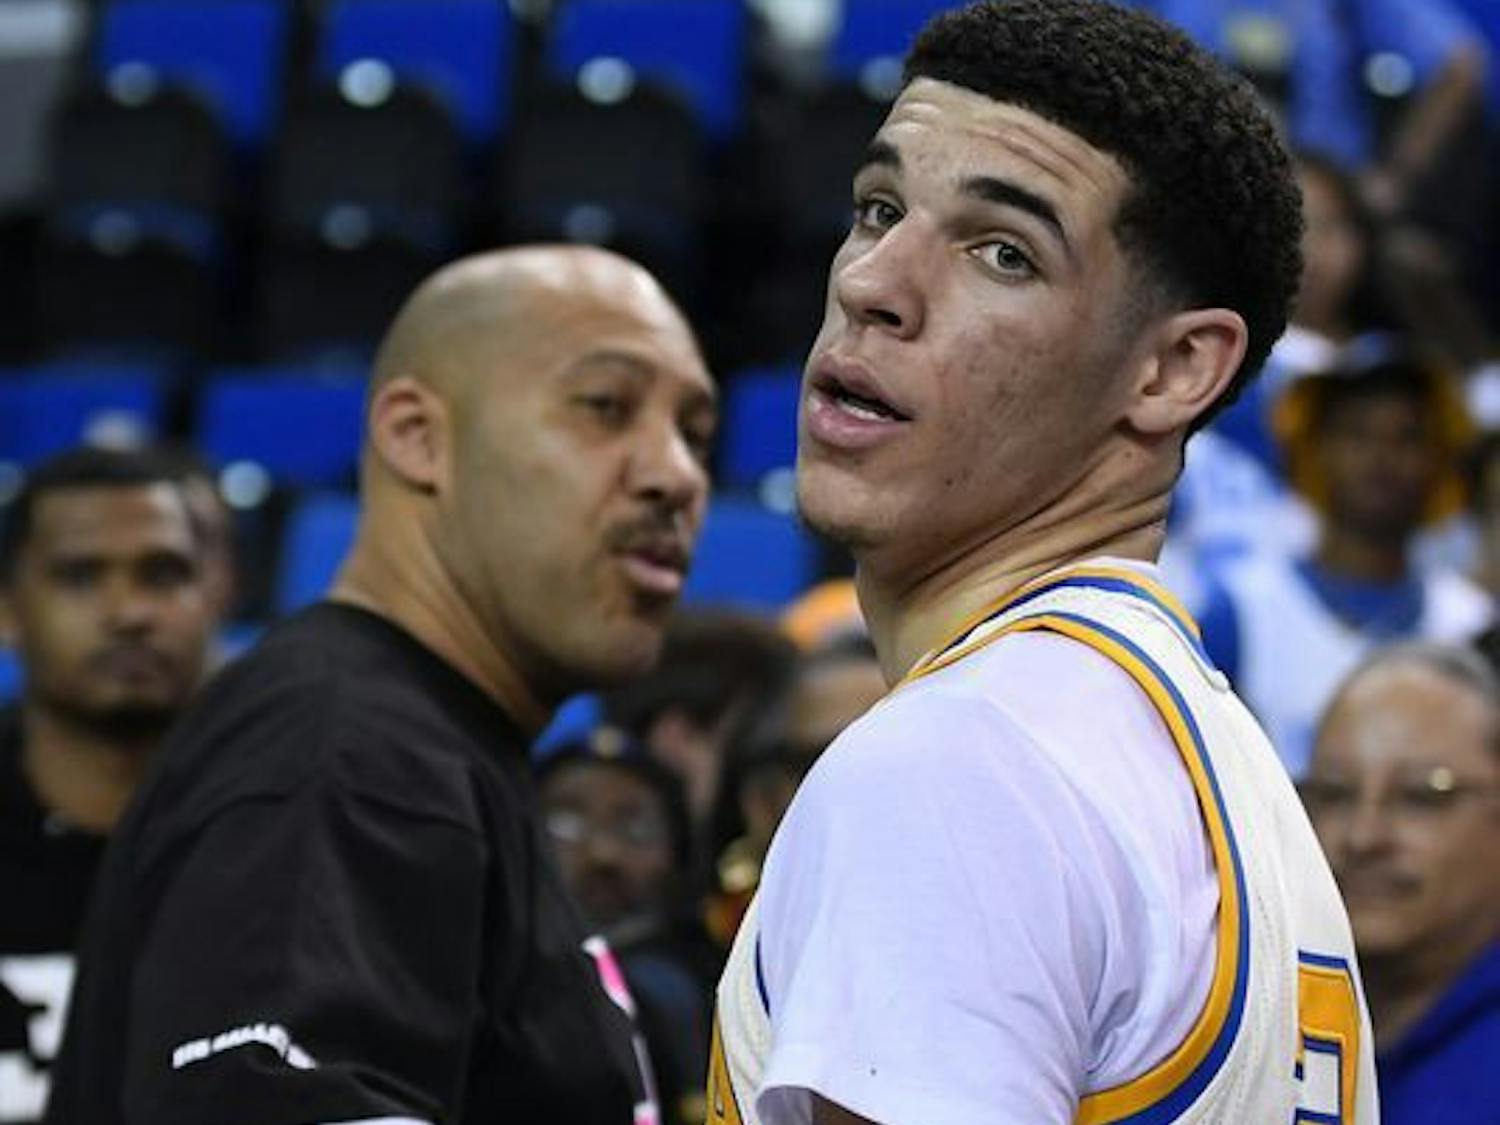 Former UCLA point guard Lonzo Ball (right) and his father, LaVar, shake hands after a game during the 2016-17 college basketball season.